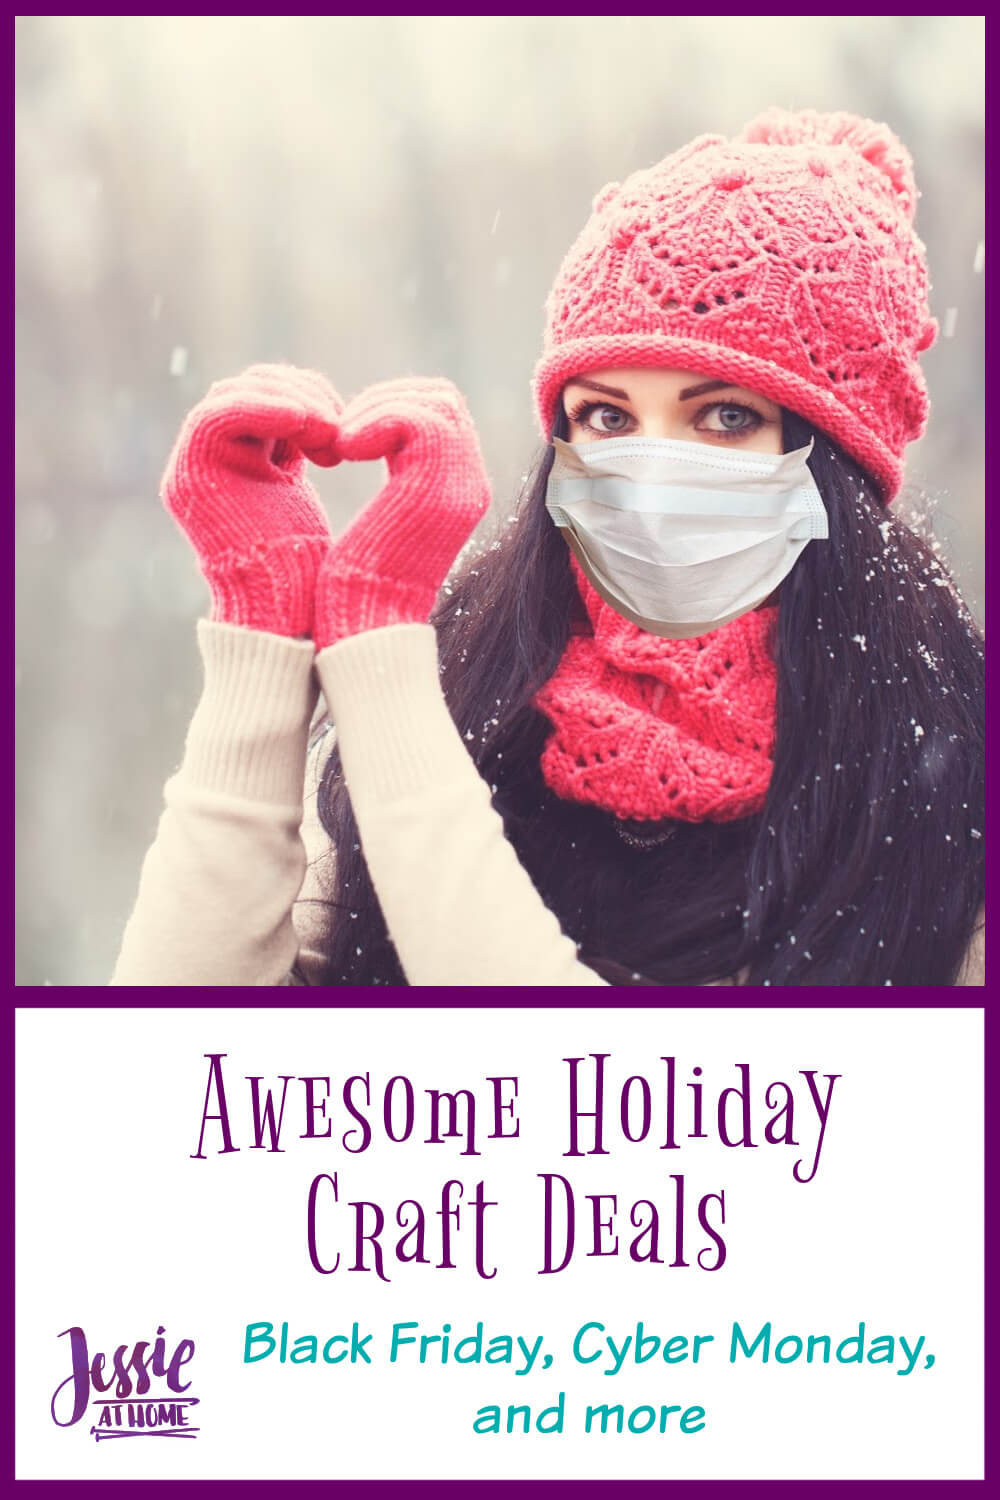 Awesome Holiday Craft Deals! Black Friday, Cyber Monday, and more!